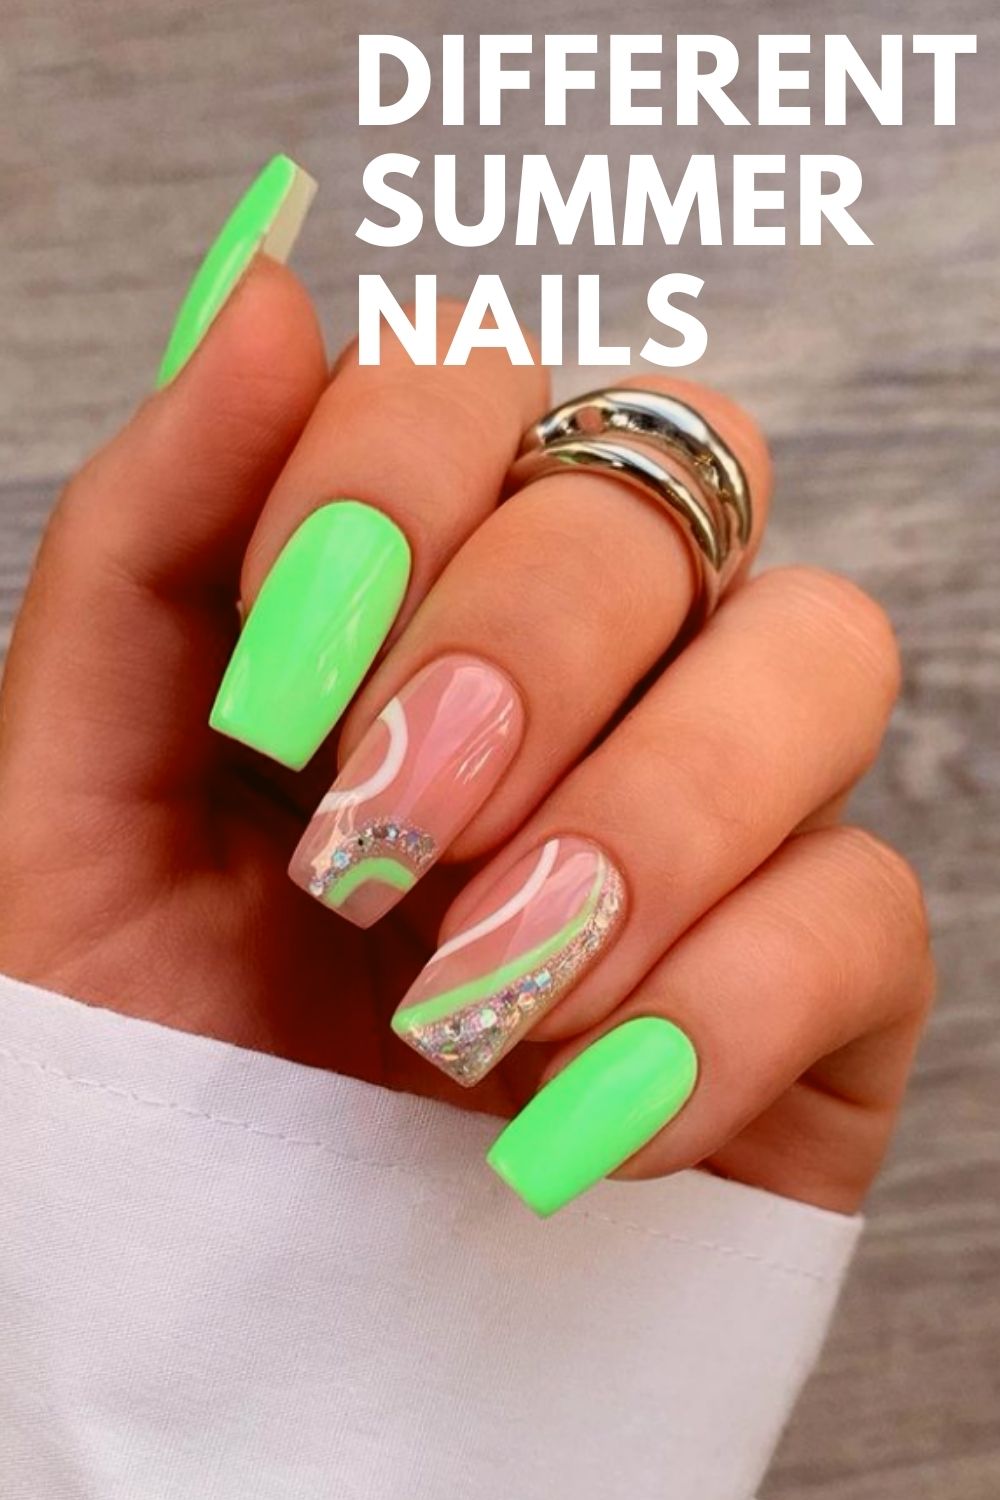 50 Summer Nail Designs You Want to Try Immediately in April